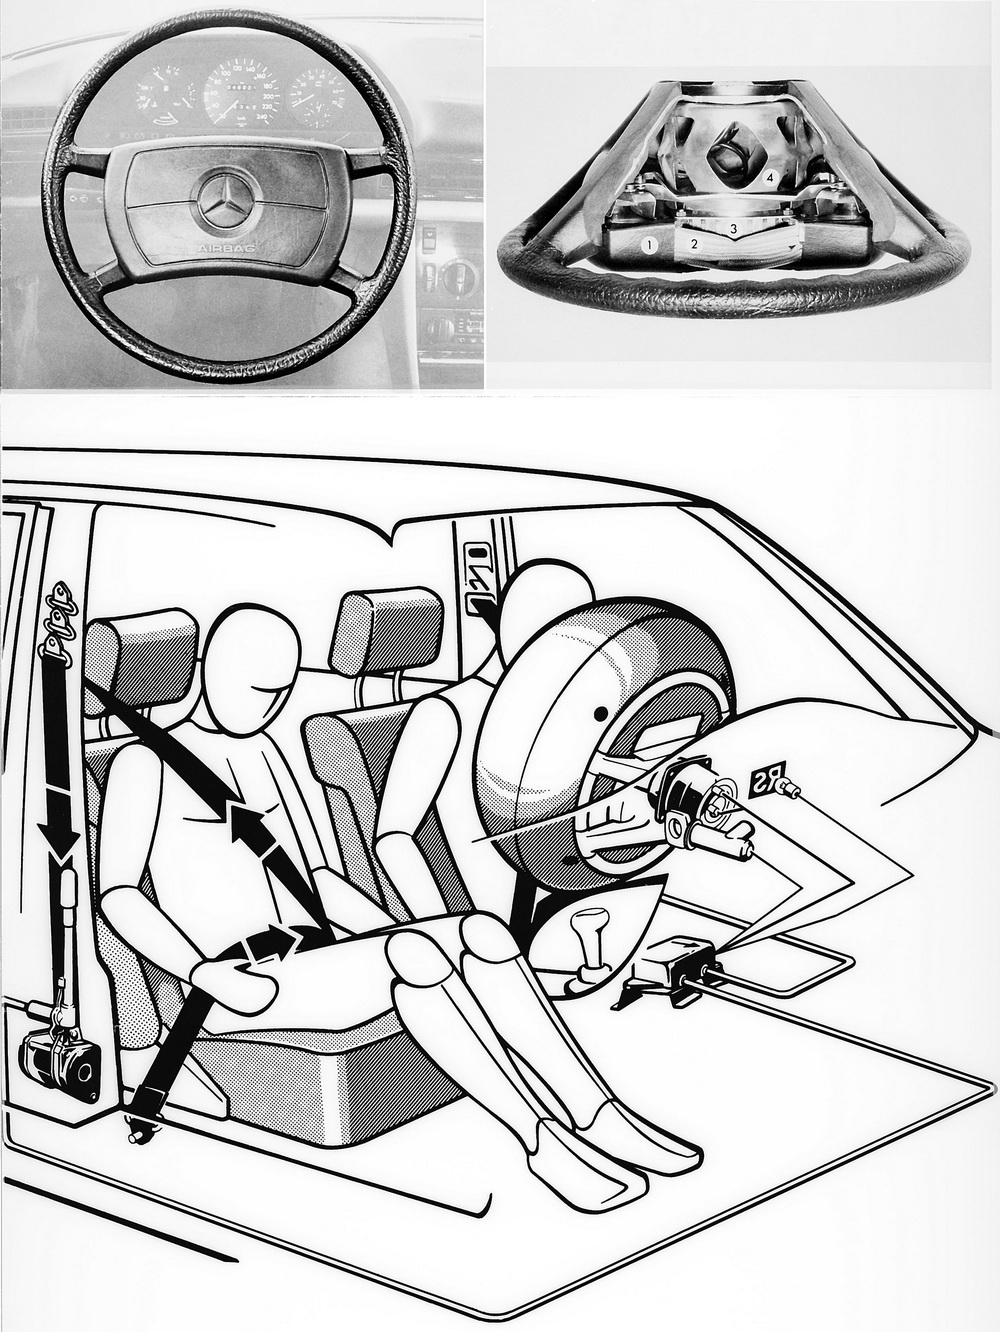 Airbag and belt tesnsioner in Mercedes-Benz S-Class, 1981